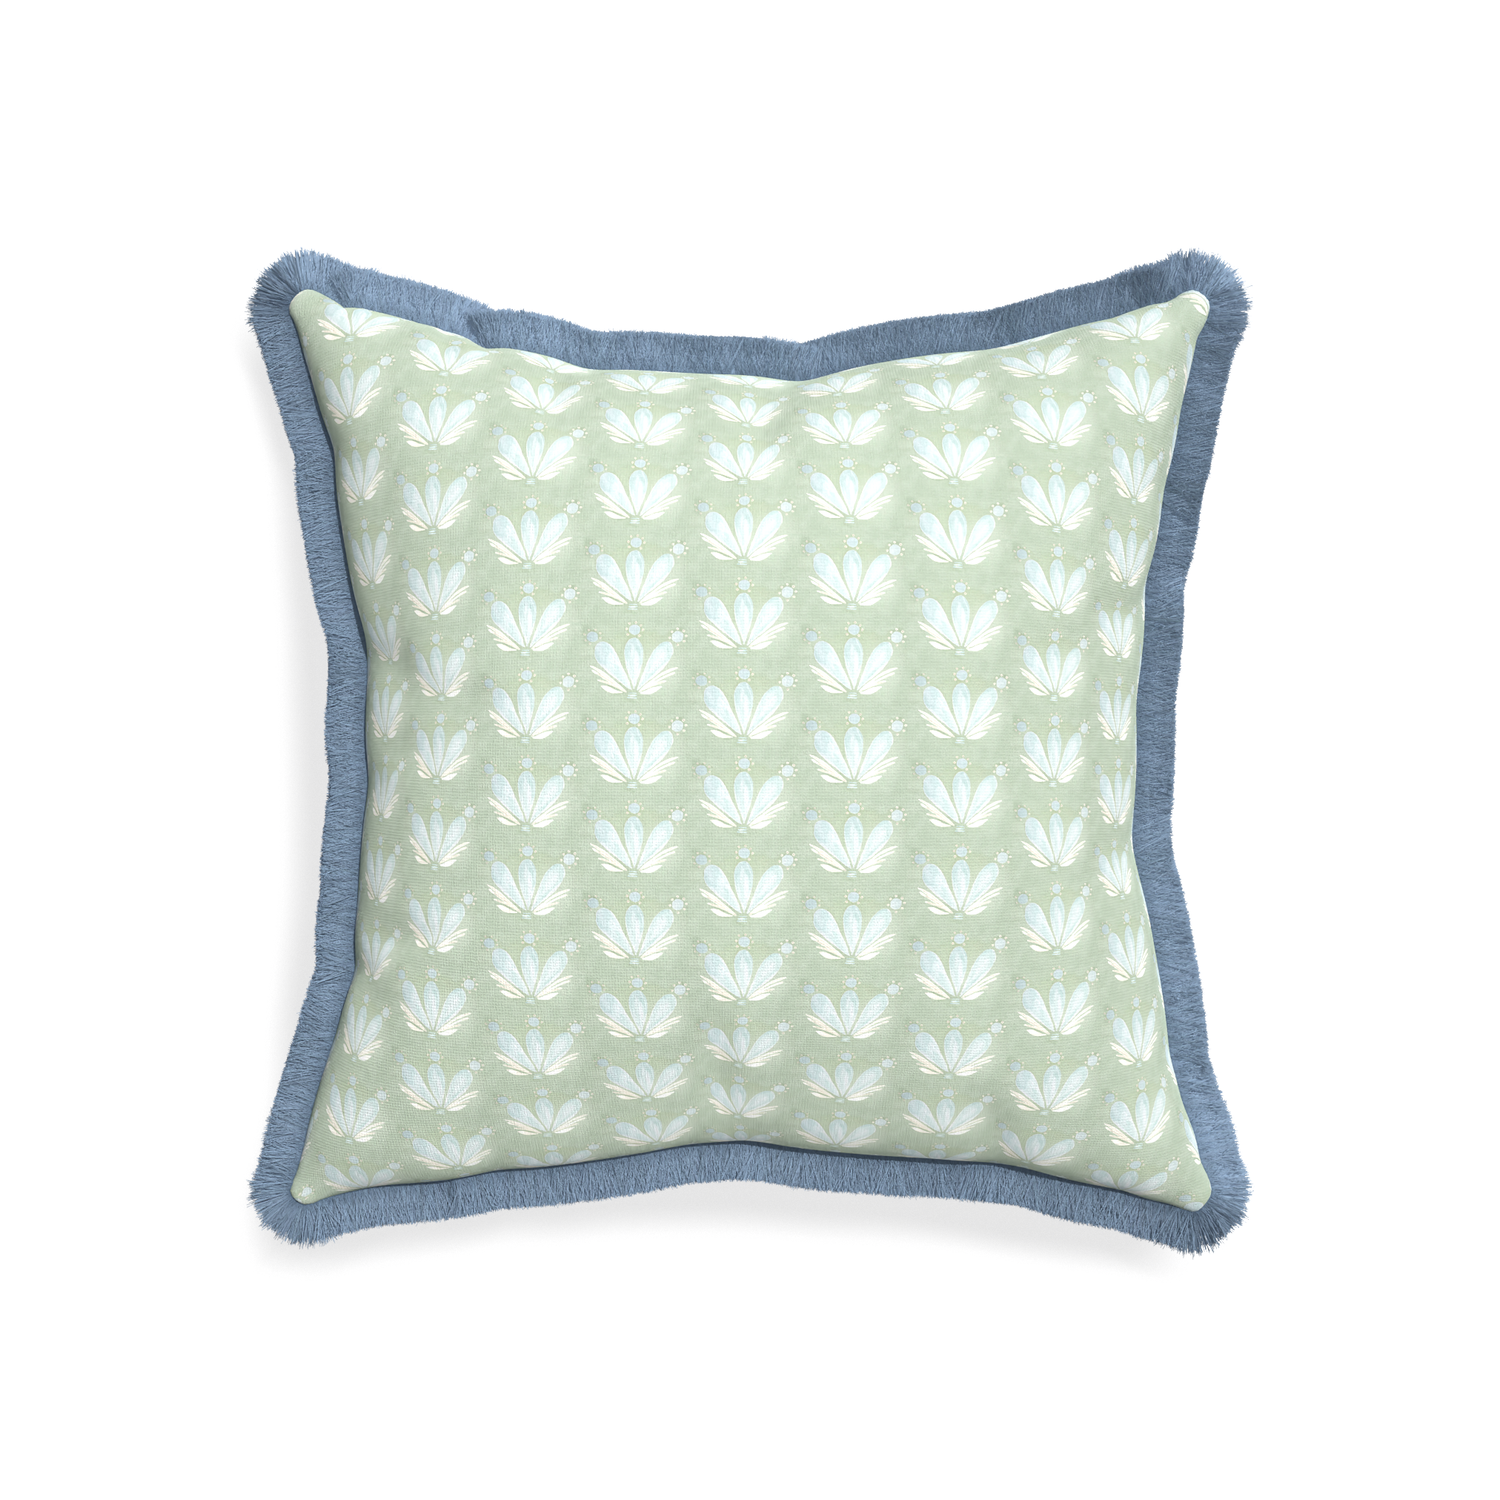 20-square serena sea salt custom blue & green floral drop repeatpillow with sky fringe on white background